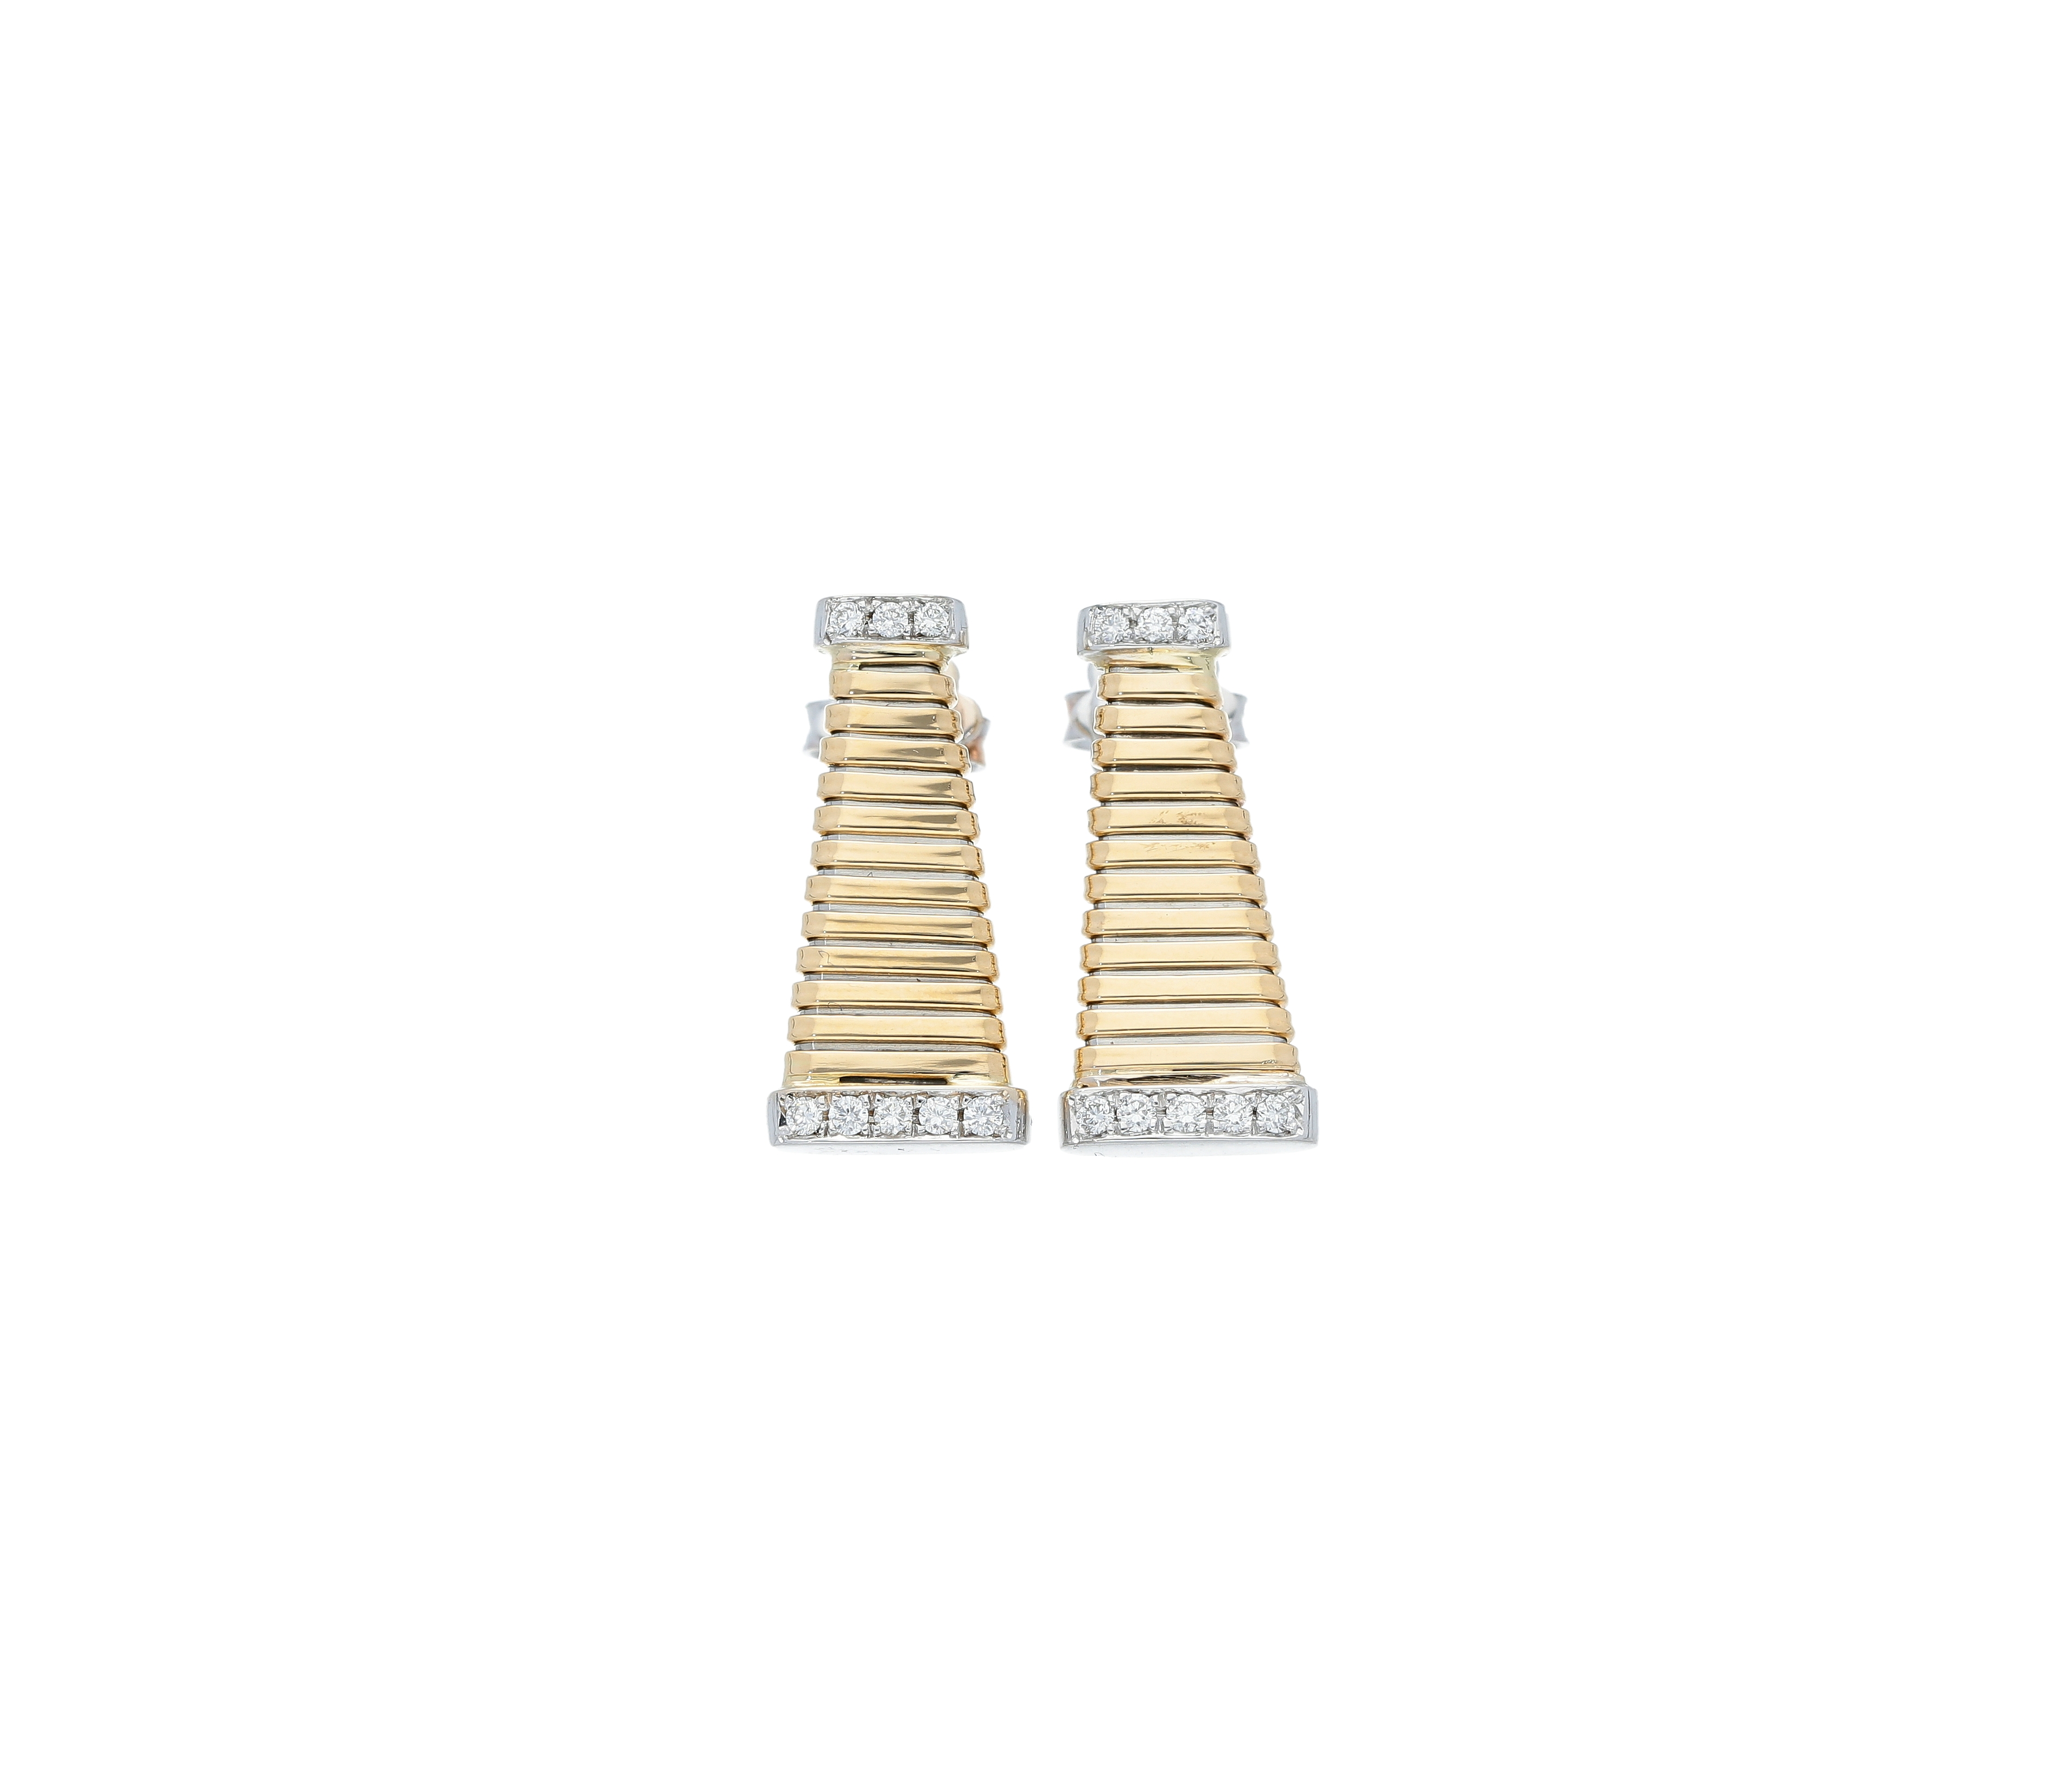 Gas Tube hand twisted earrings in 18kt yellow and white gold